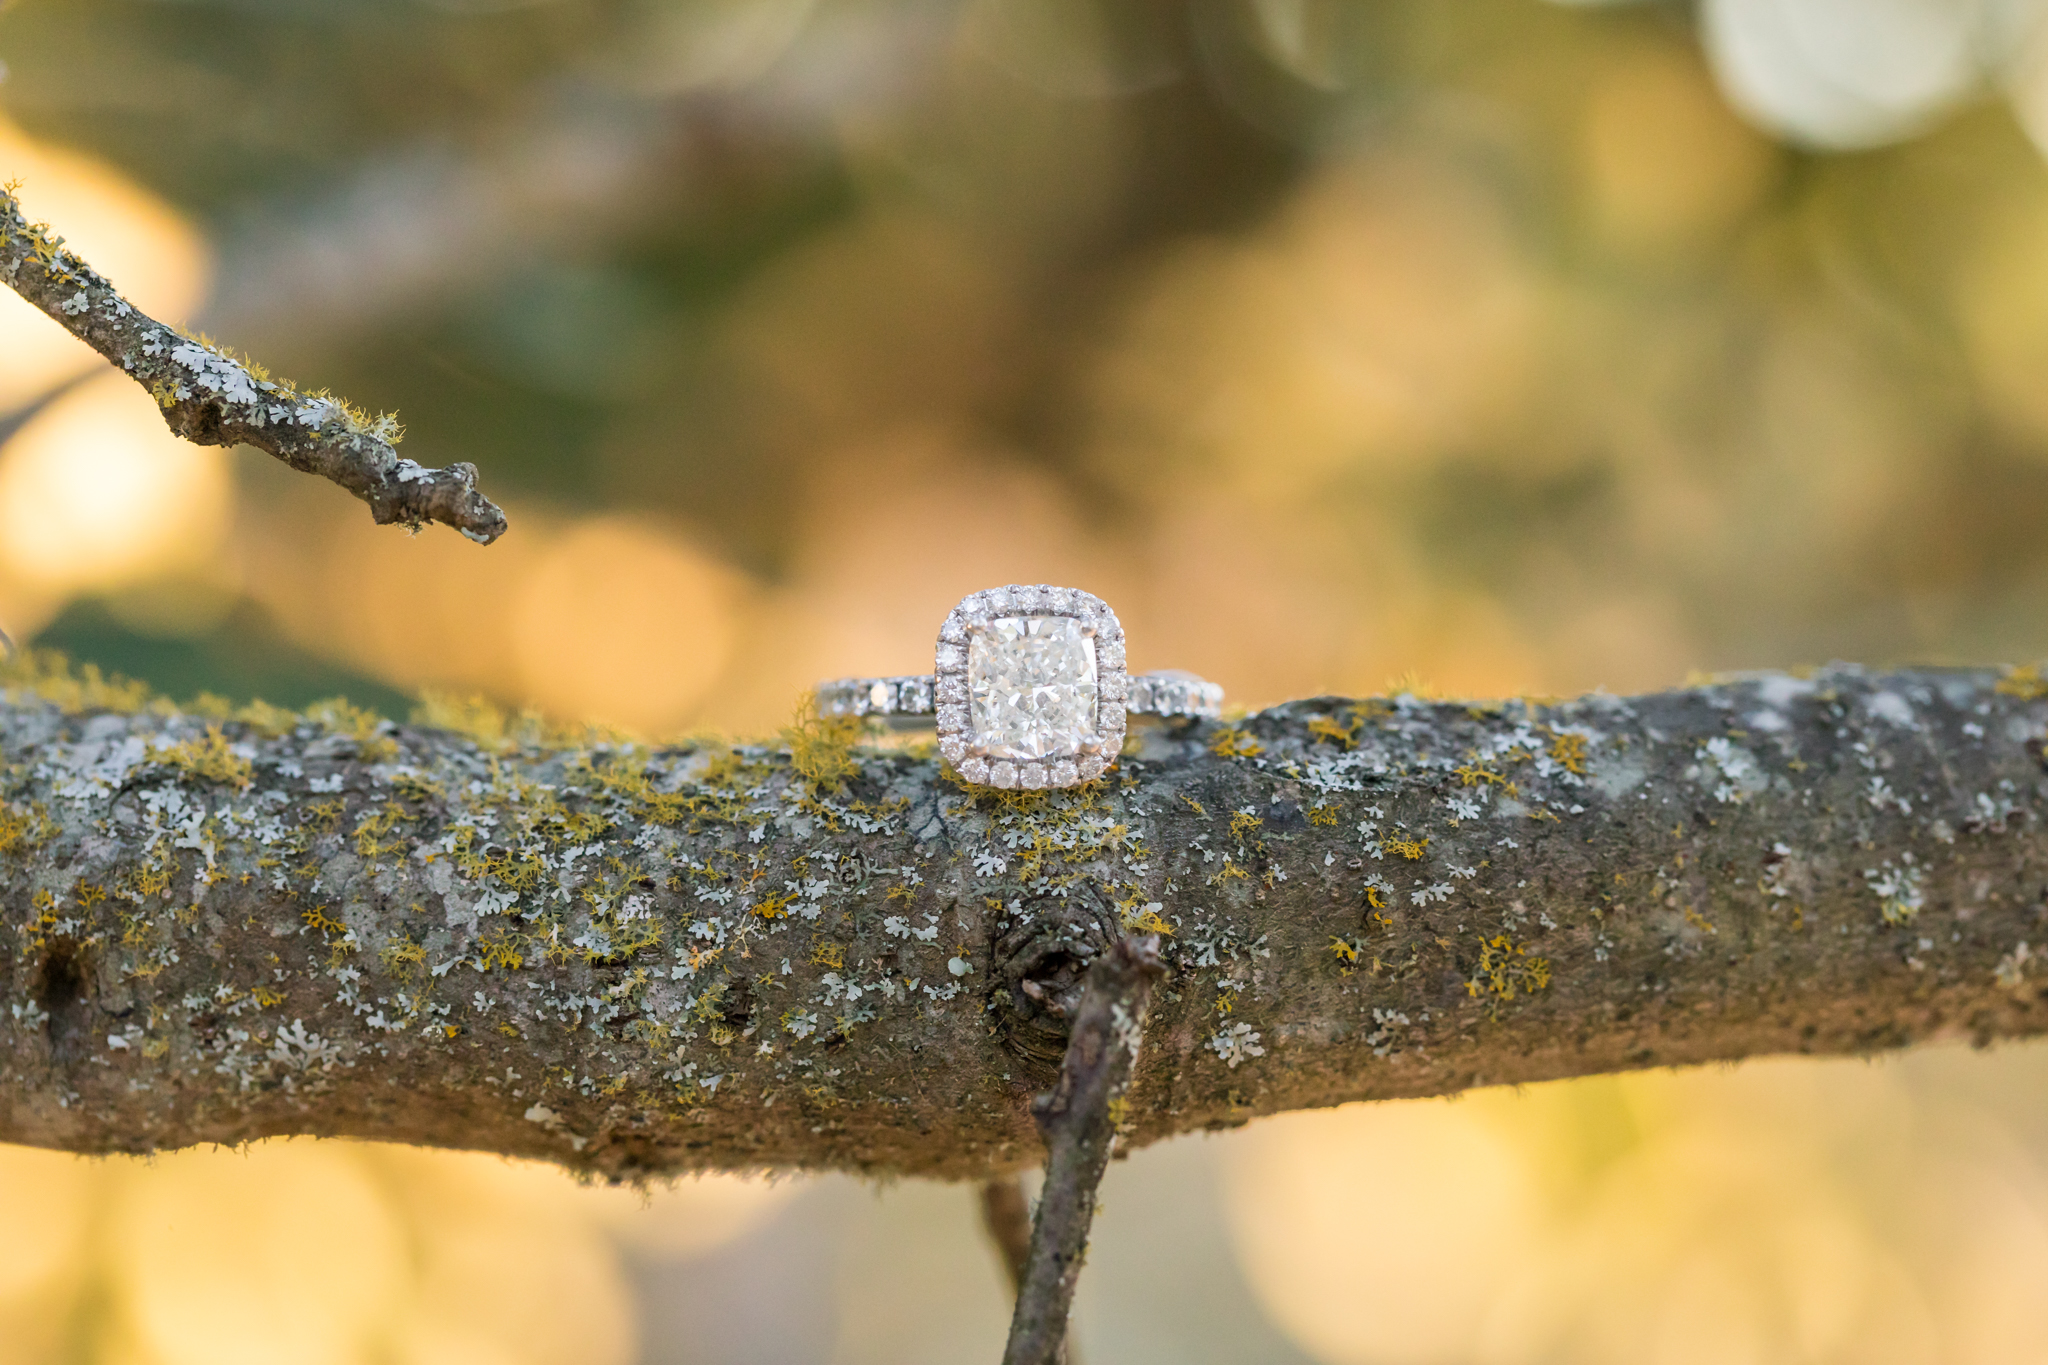 An Engagement Session at Cibolo Nature Center in Boerne, TX by Dawn Elizabeth Studios, Boerne Wedding Photographer